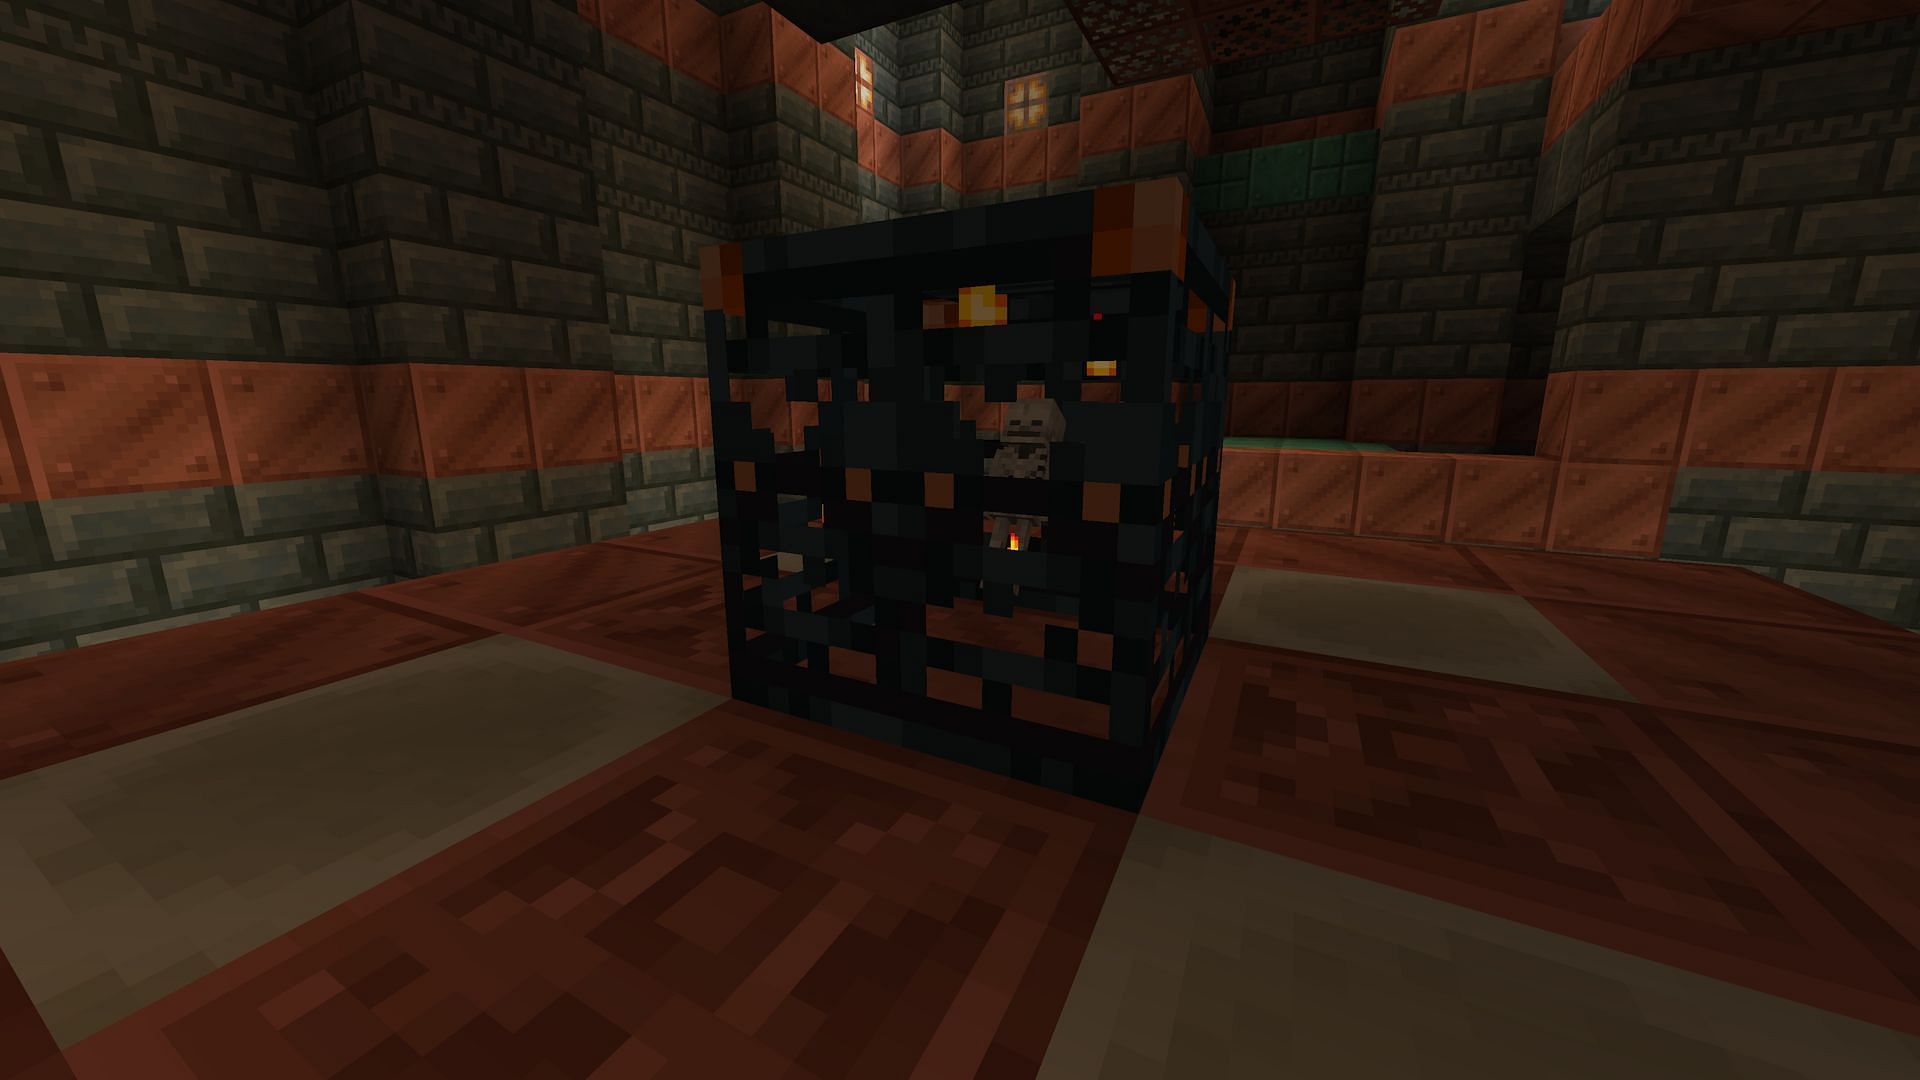 Trial spawners are an exciting glimpse into the future of Minecraft structures (Image via Mojang)